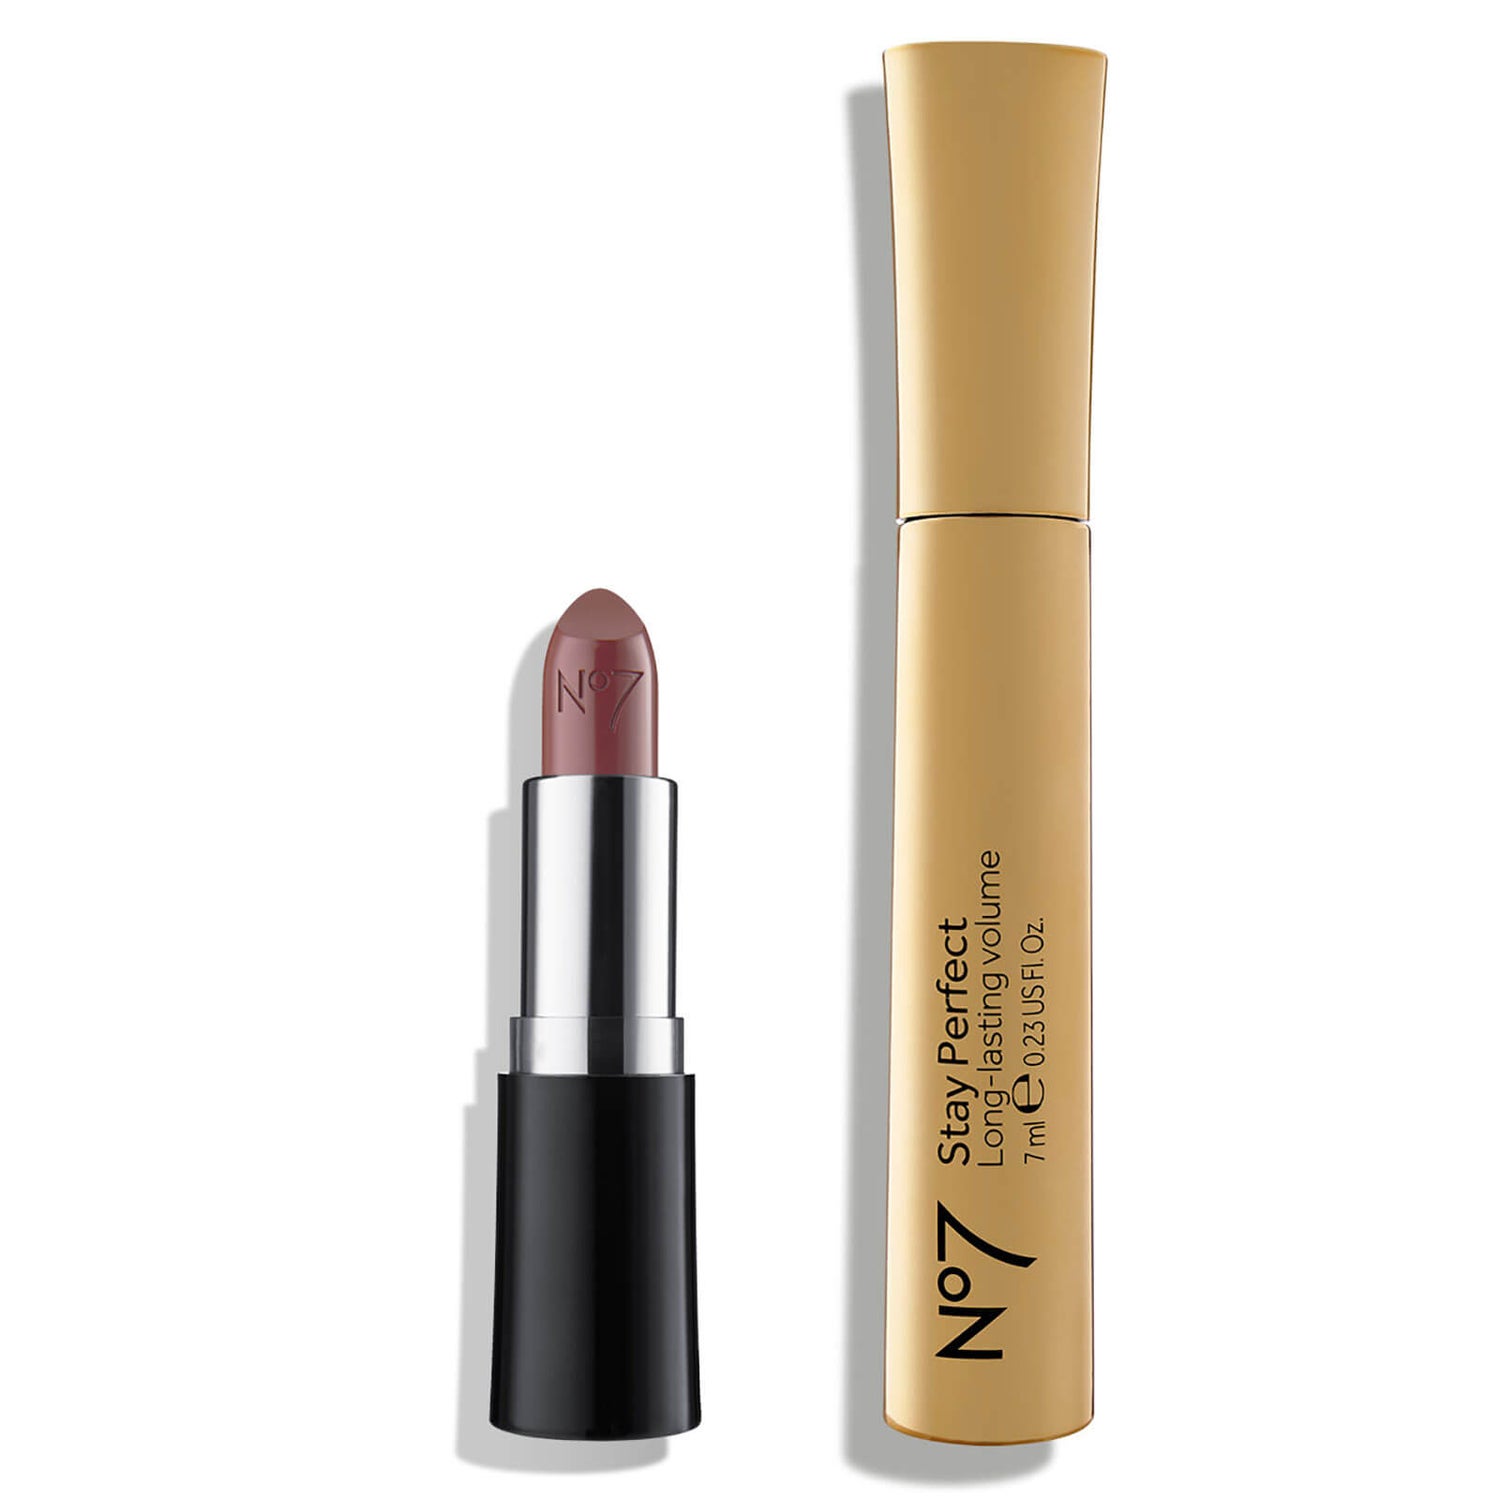 Nutmeg Spice Moisture Drench Lipstick and Stay Perfect Mascara Duo